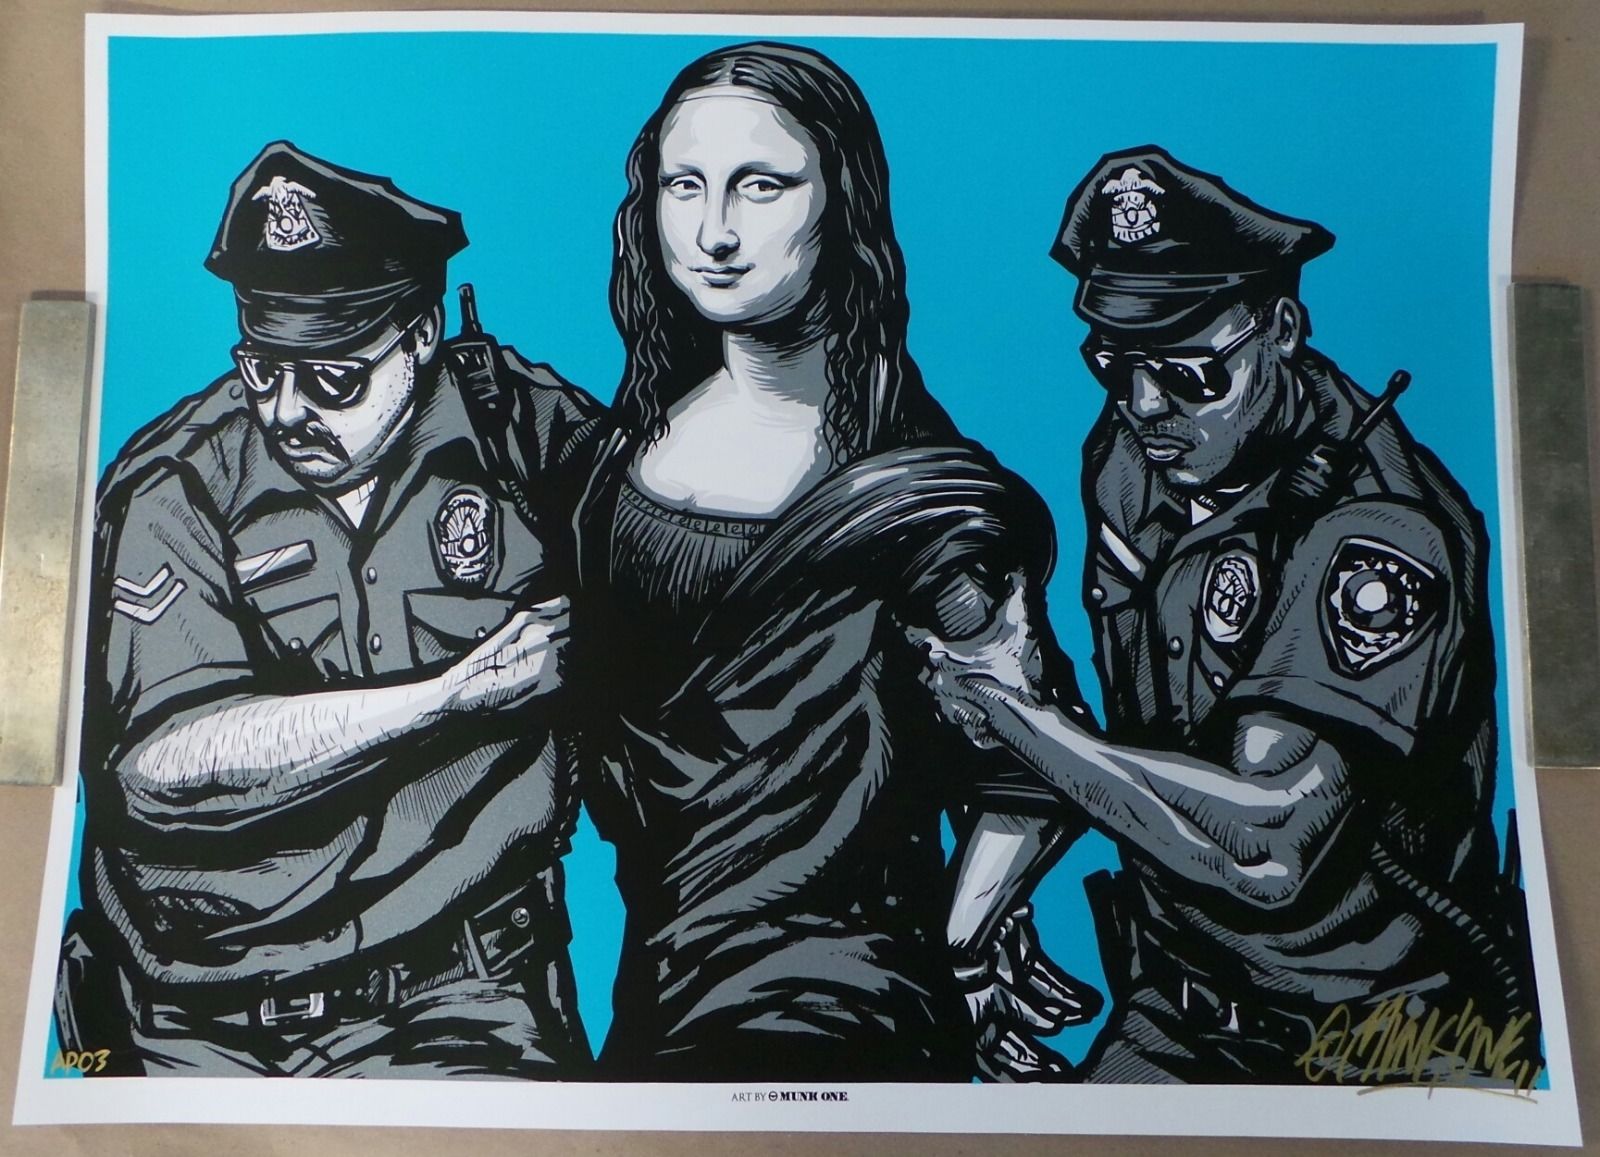 "Arrested (Special AP edition)" by Munk One.  Circa 2013. 